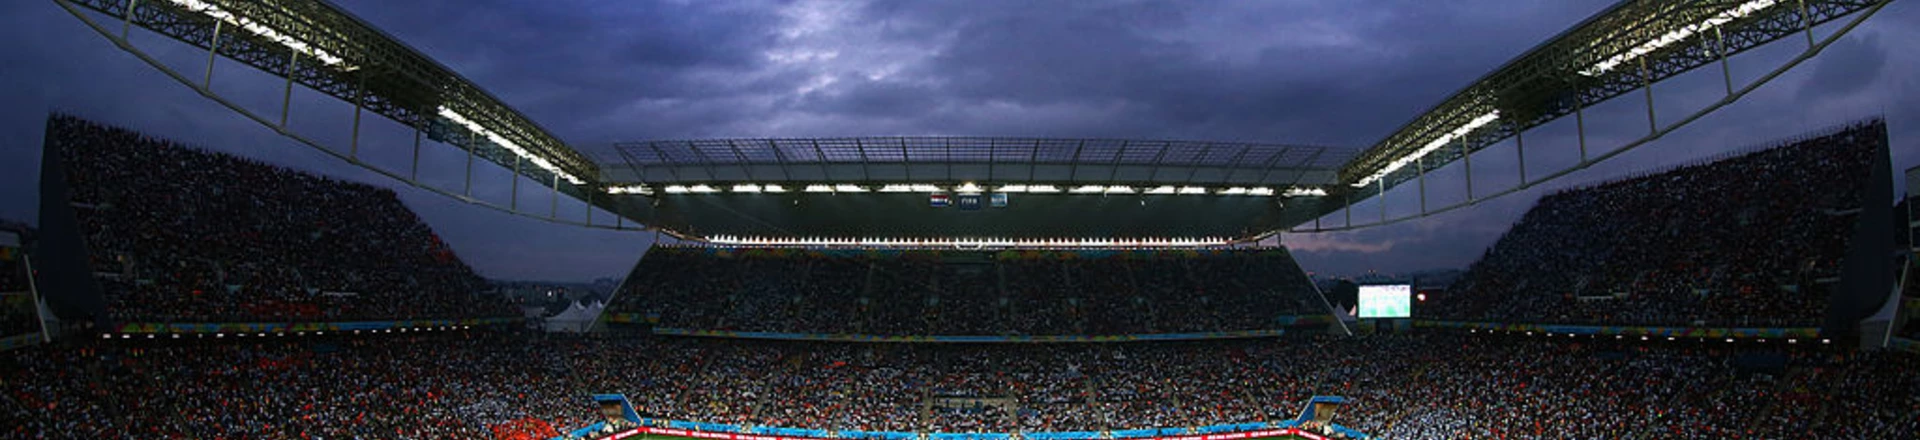 SAO PAULO, BRAZIL - JULY 09:  A general view of the stadium during the 2014 FIFA World Cup Brazil Semi Final match between the Netherlands and Argentina at Arena de Sao Paulo on July 9, 2014 in Sao Paulo, Brazil.  (Photo by Julian Finney/Getty Images)